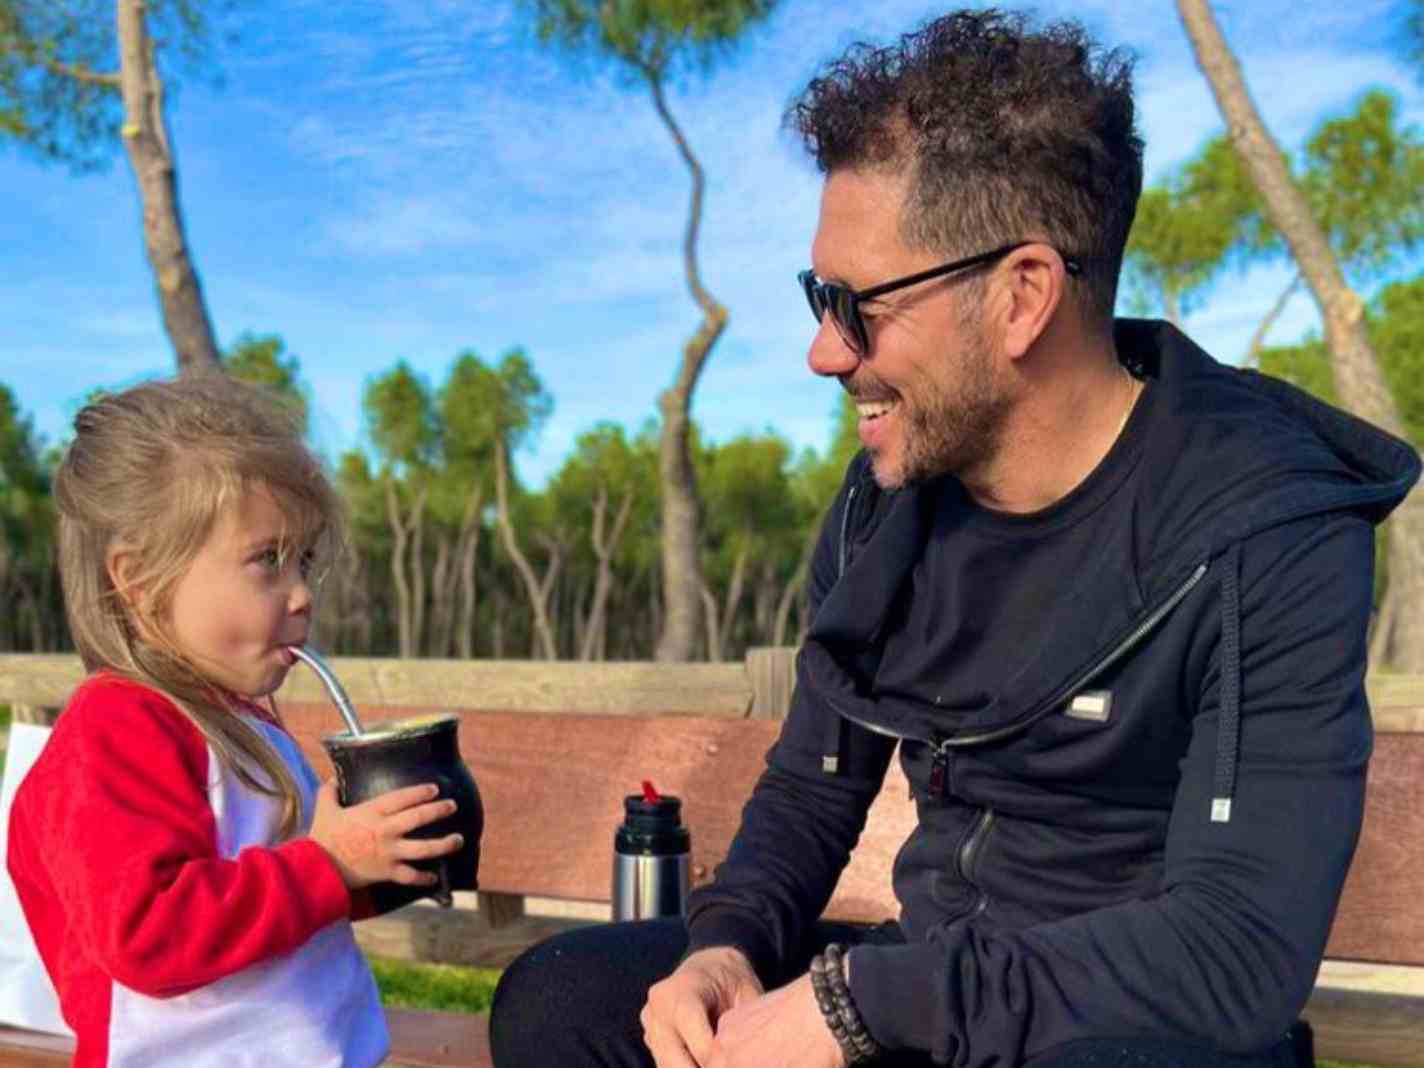 Diego Simeone is navigating fatherhood with a 23-year age gap between his youngest and oldest kids